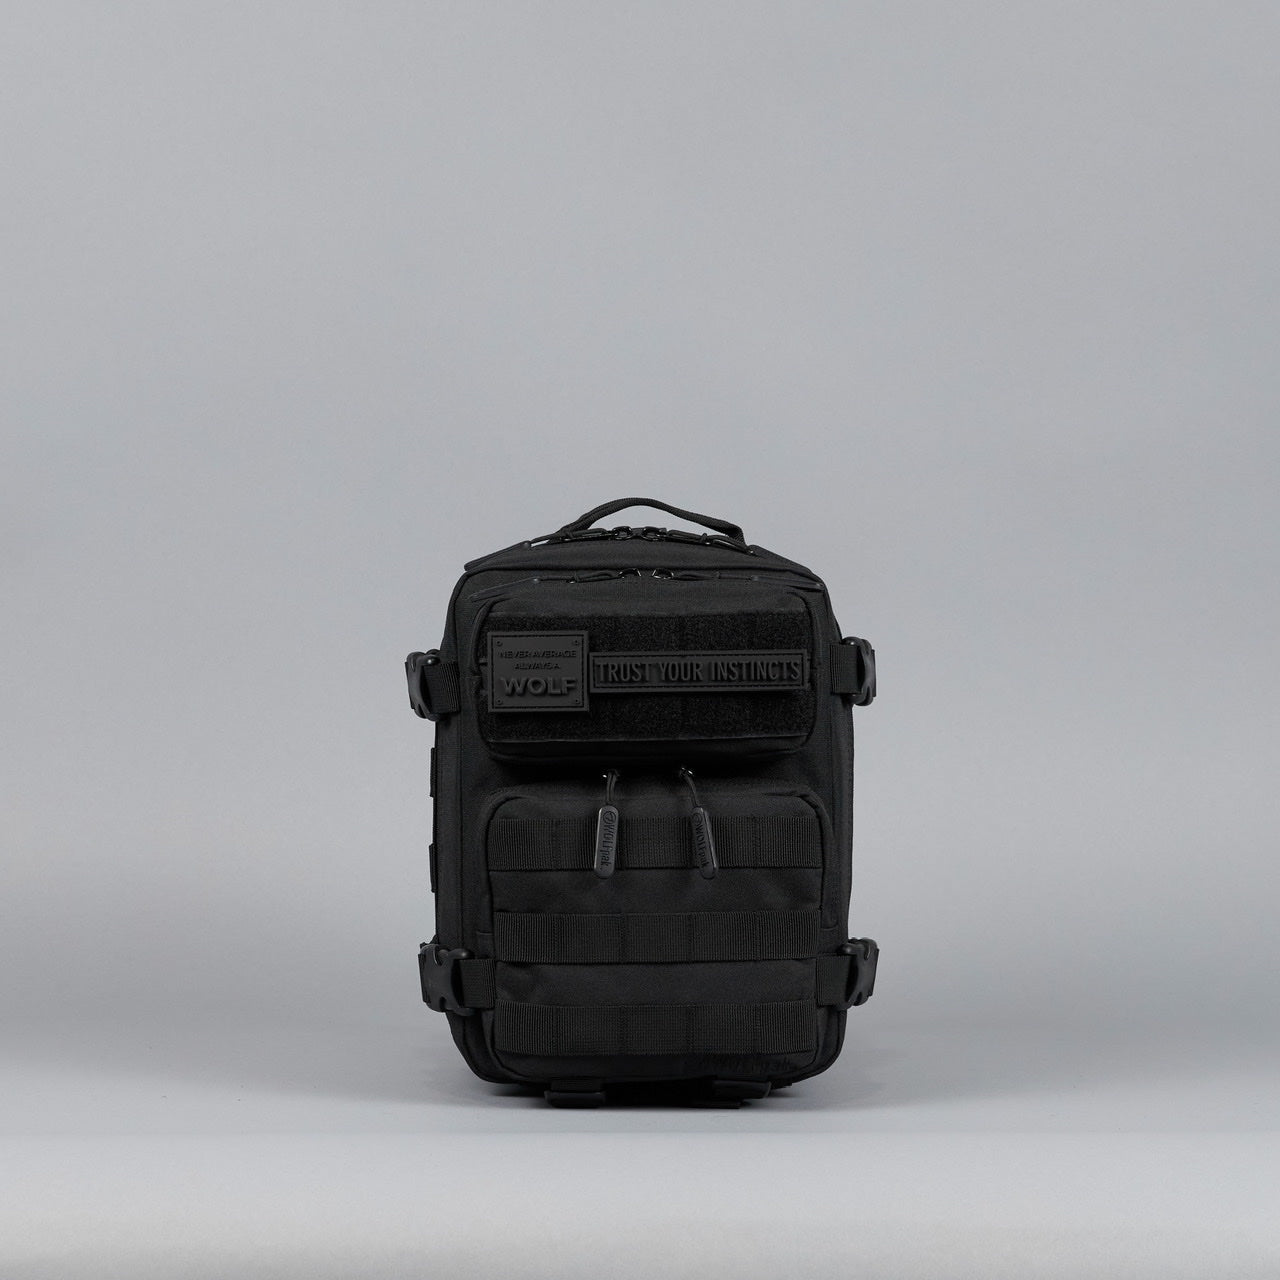 9L Mini Nightshade Edition Meal Prep Management Backpack